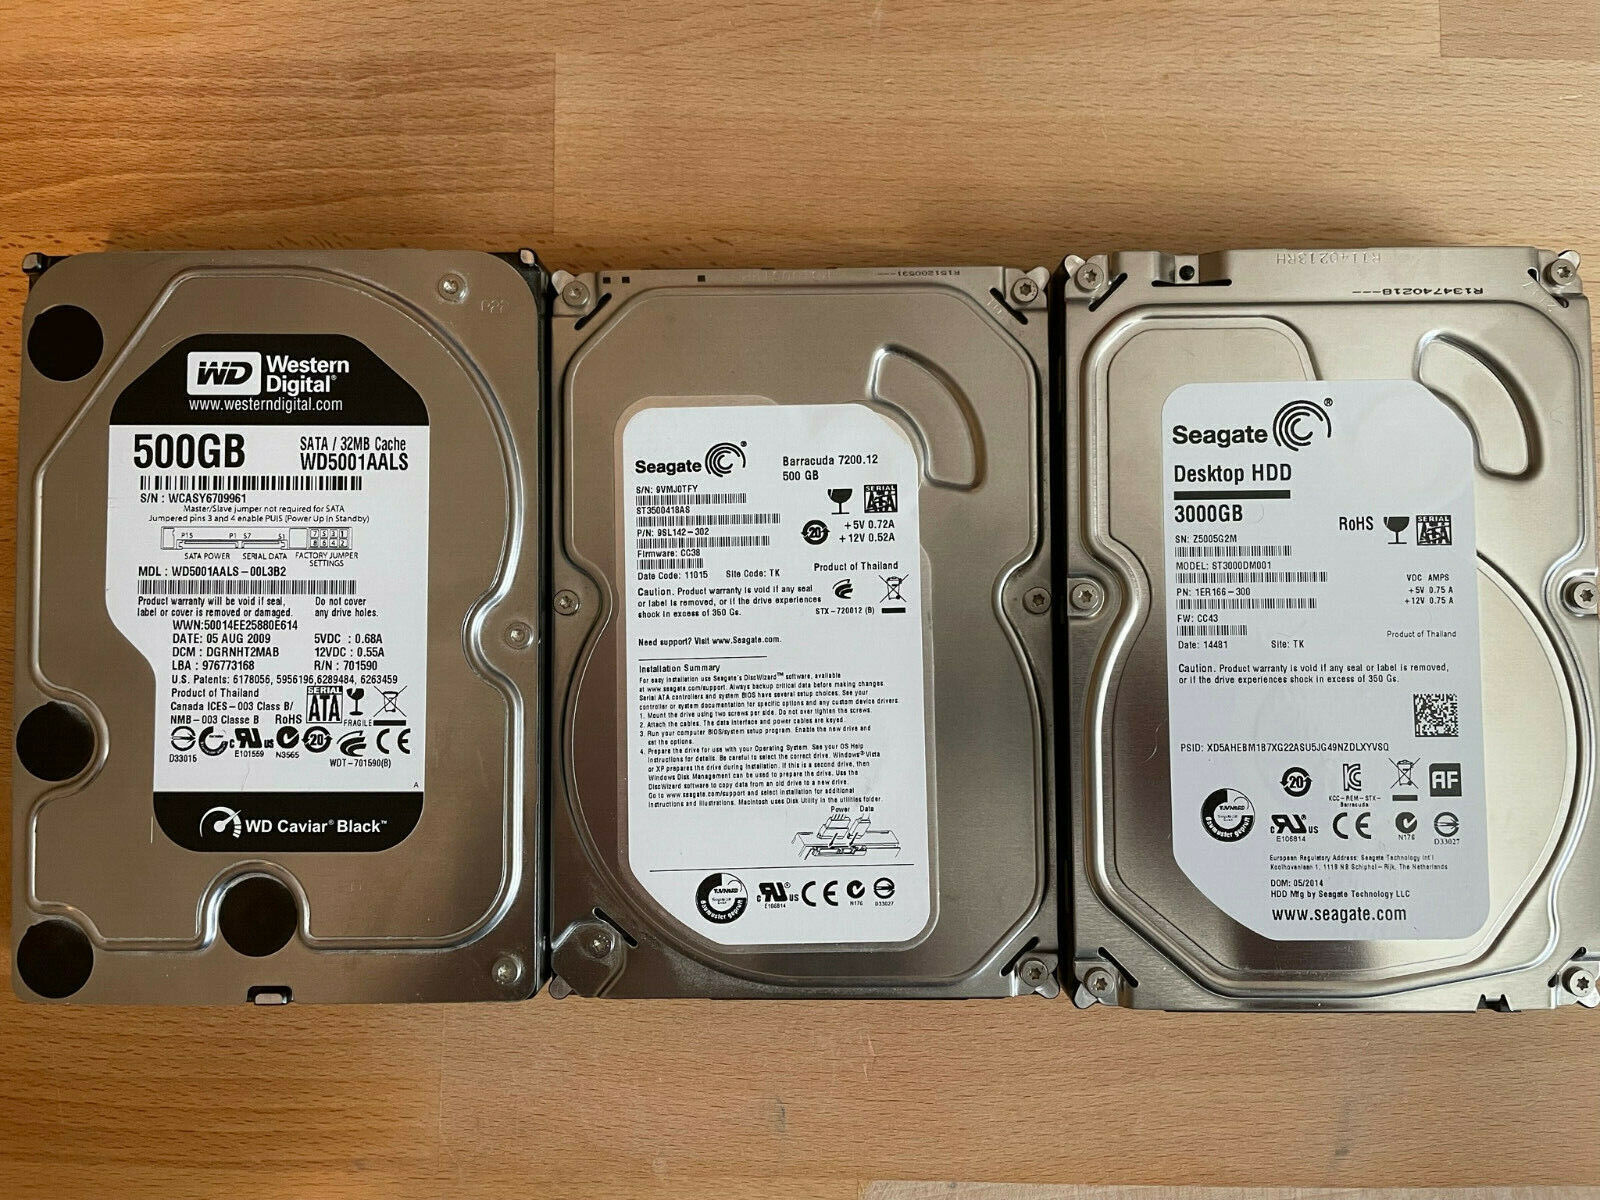 Lot of 3 hard drives - 4 TB total space